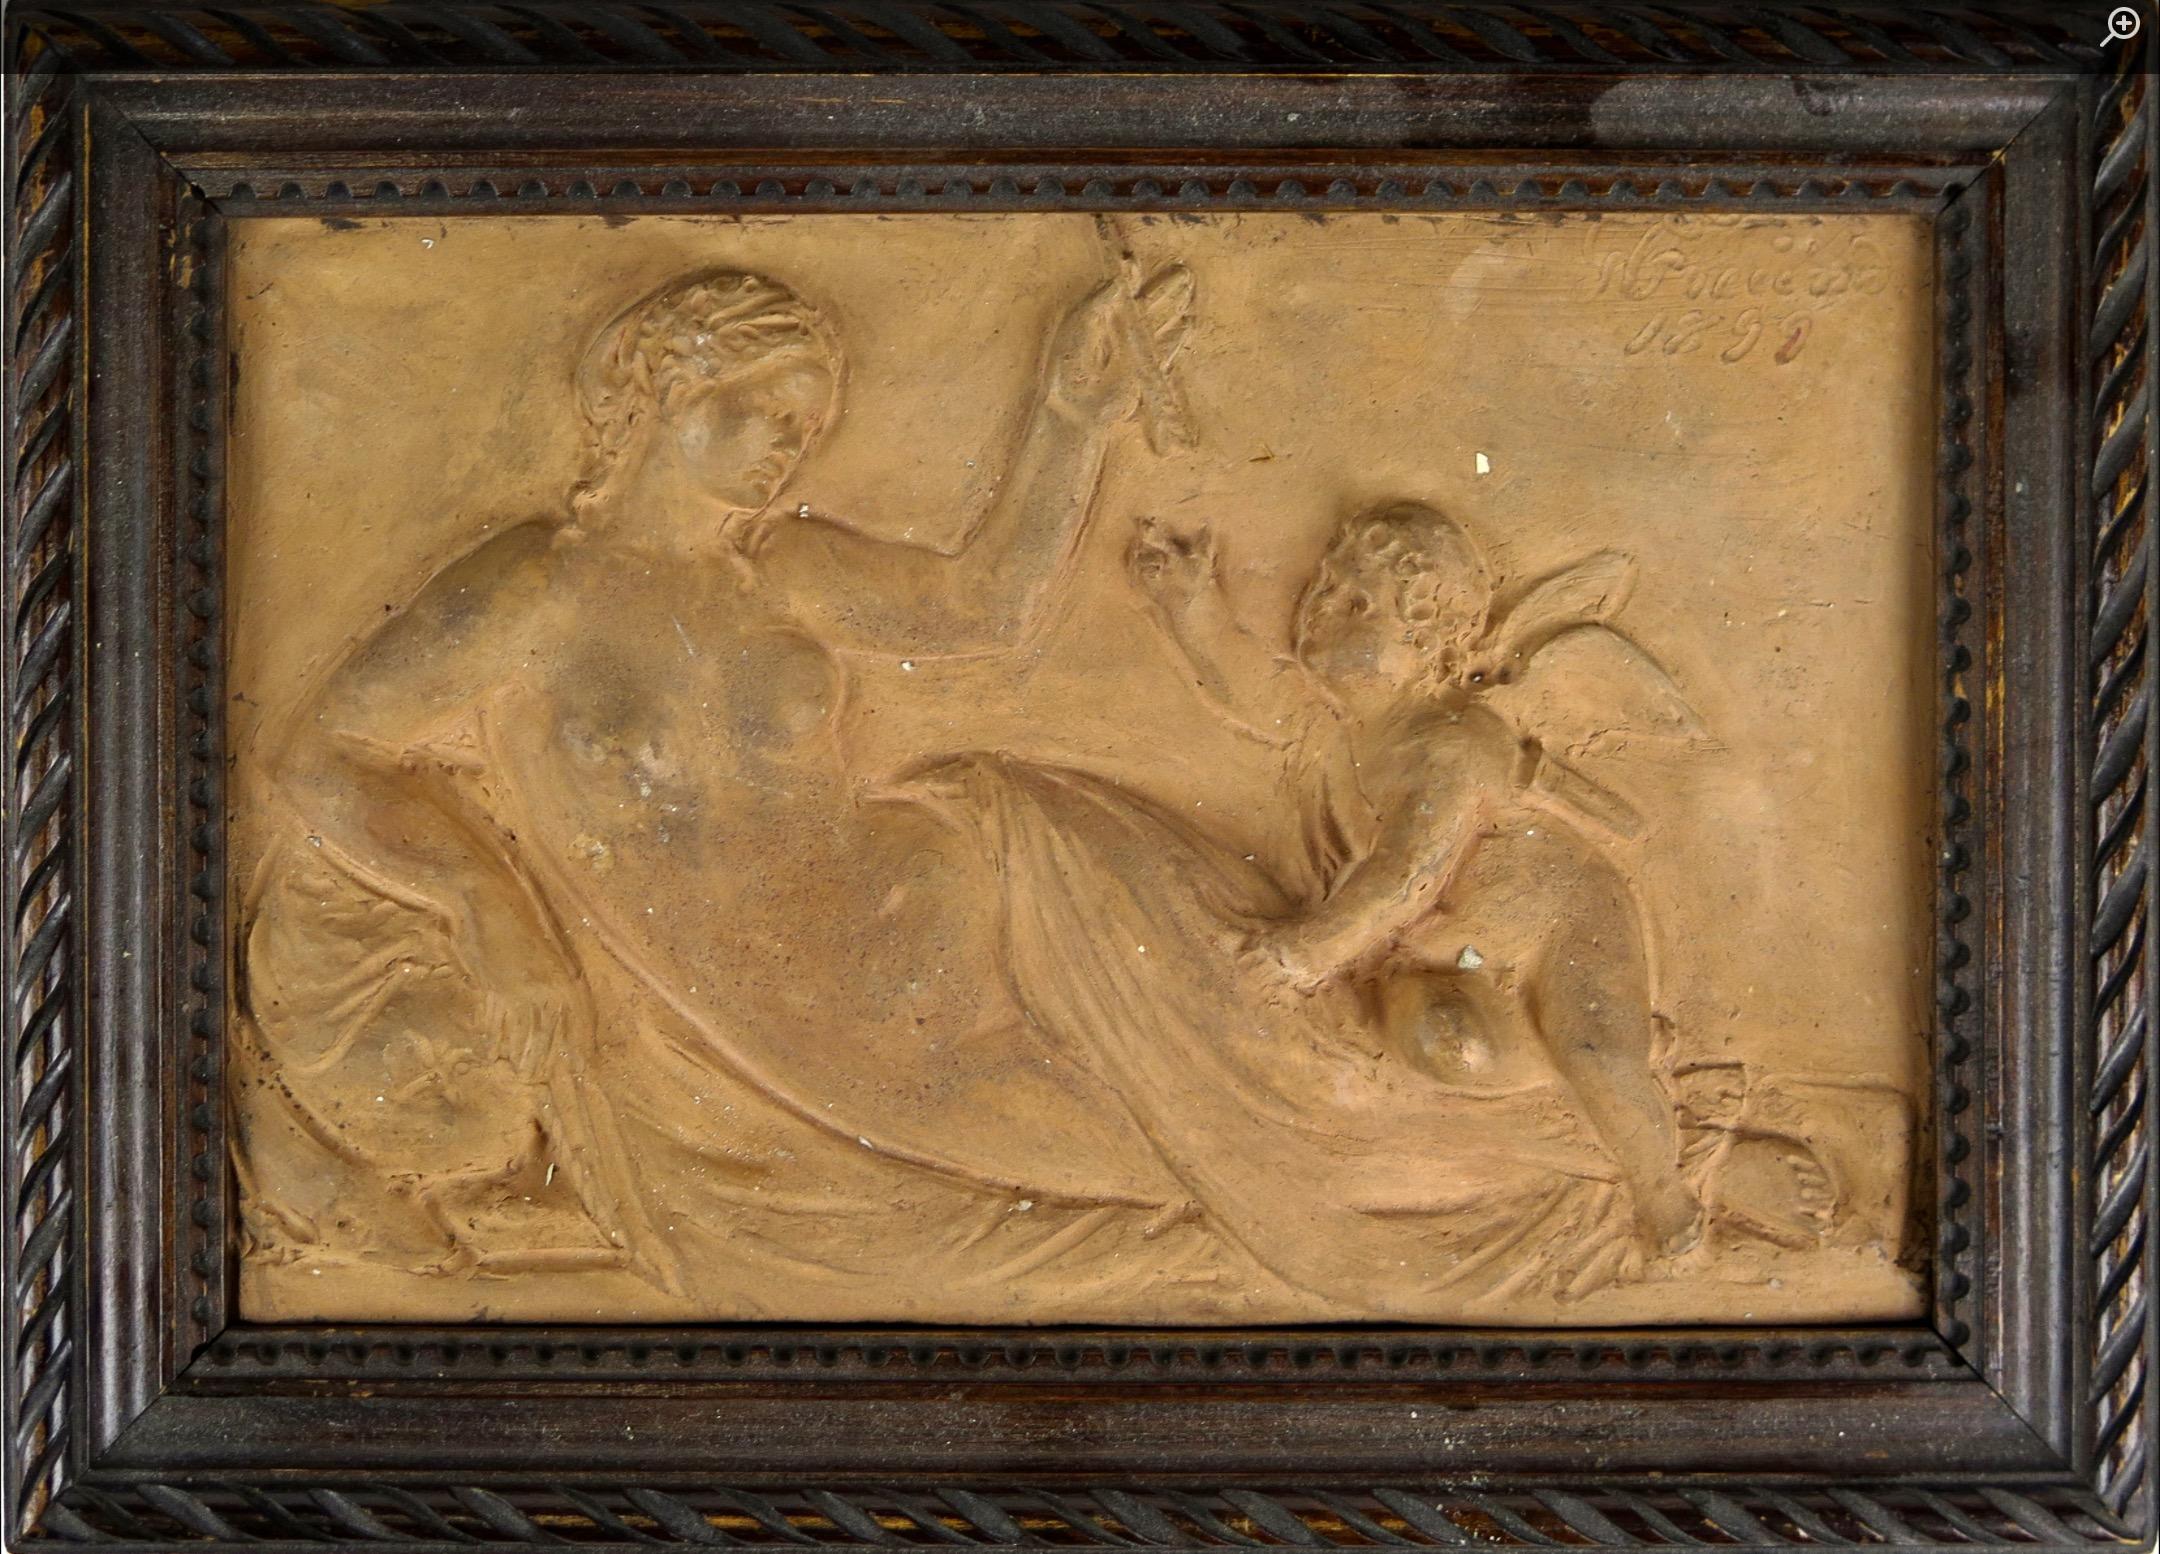 Georg Christian Freund, Terracotta Relief, Signed and Dated 1899 1